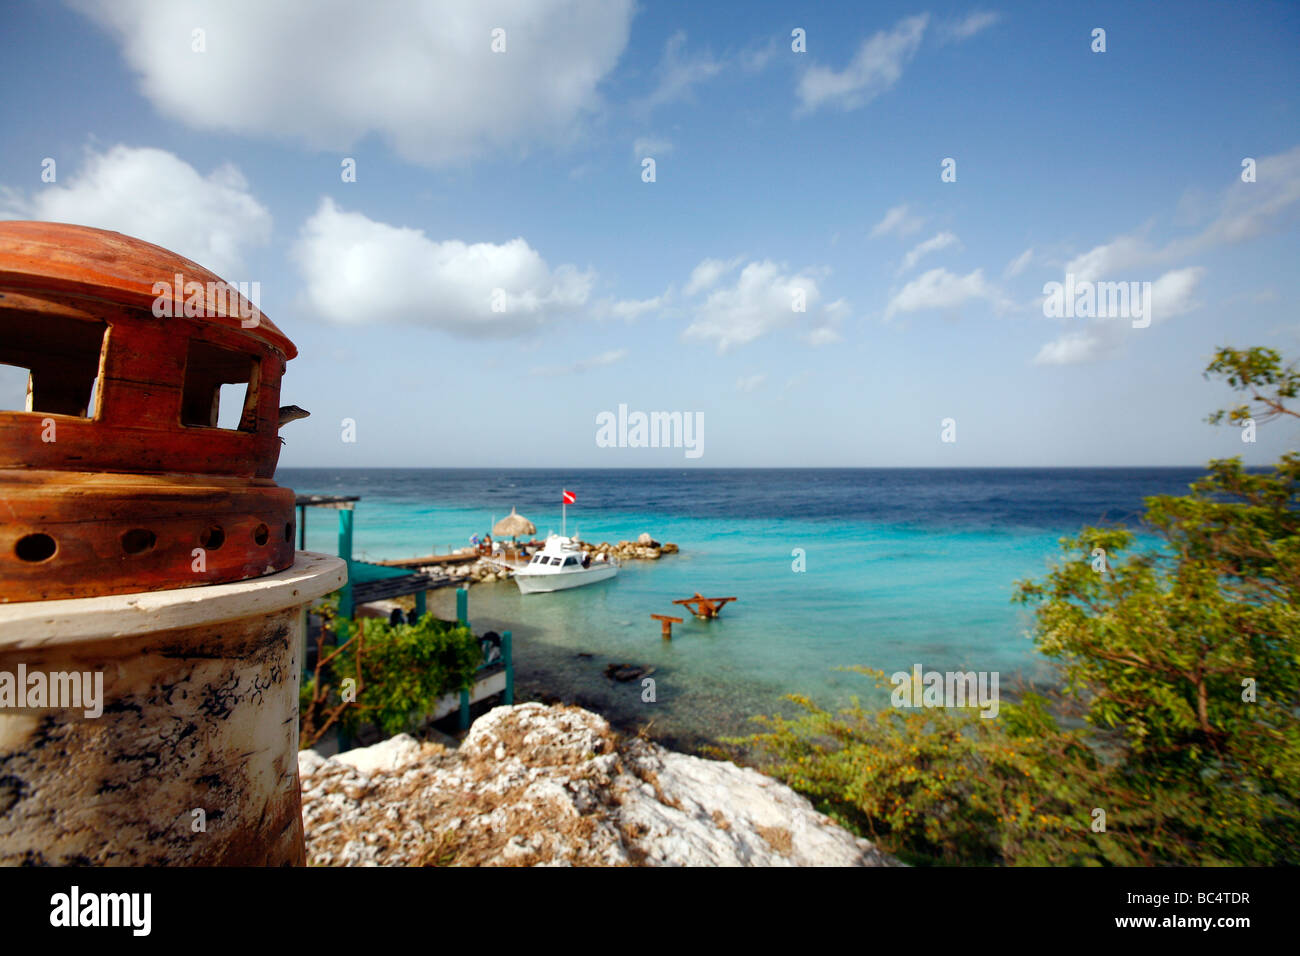 View over the ocean from the Caribbean isle Curacao in the Netherlands Antilles. Model lighthouse and blue sea are visible Stock Photo